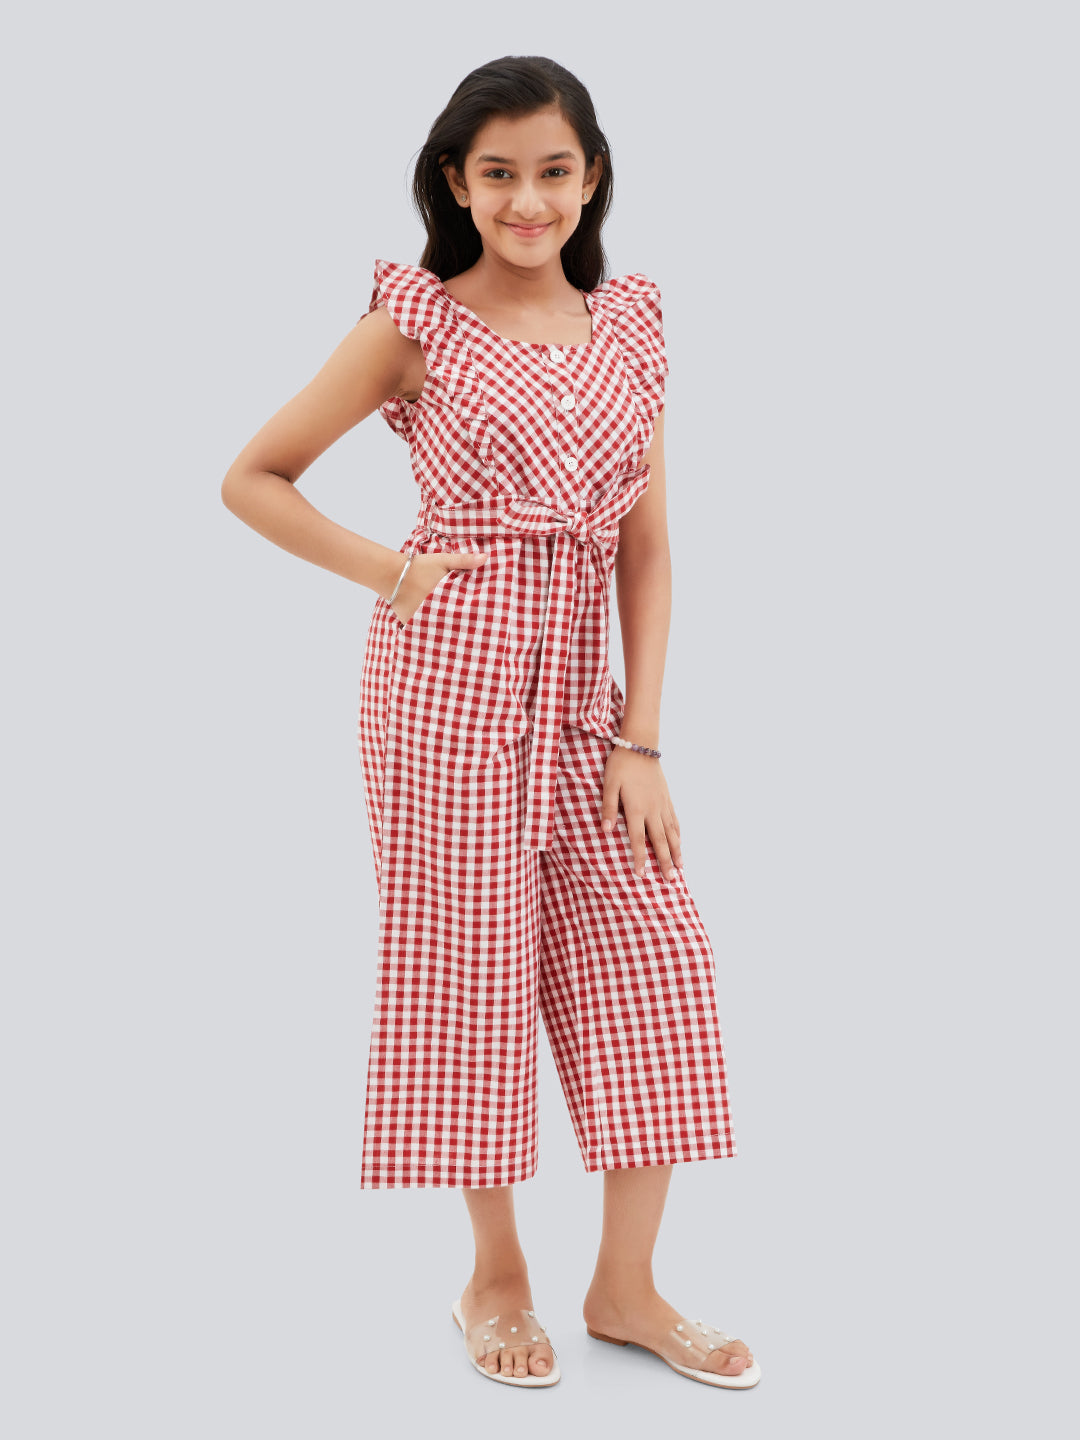 Olele® June Jumpsuit - Red and White Gingham Check